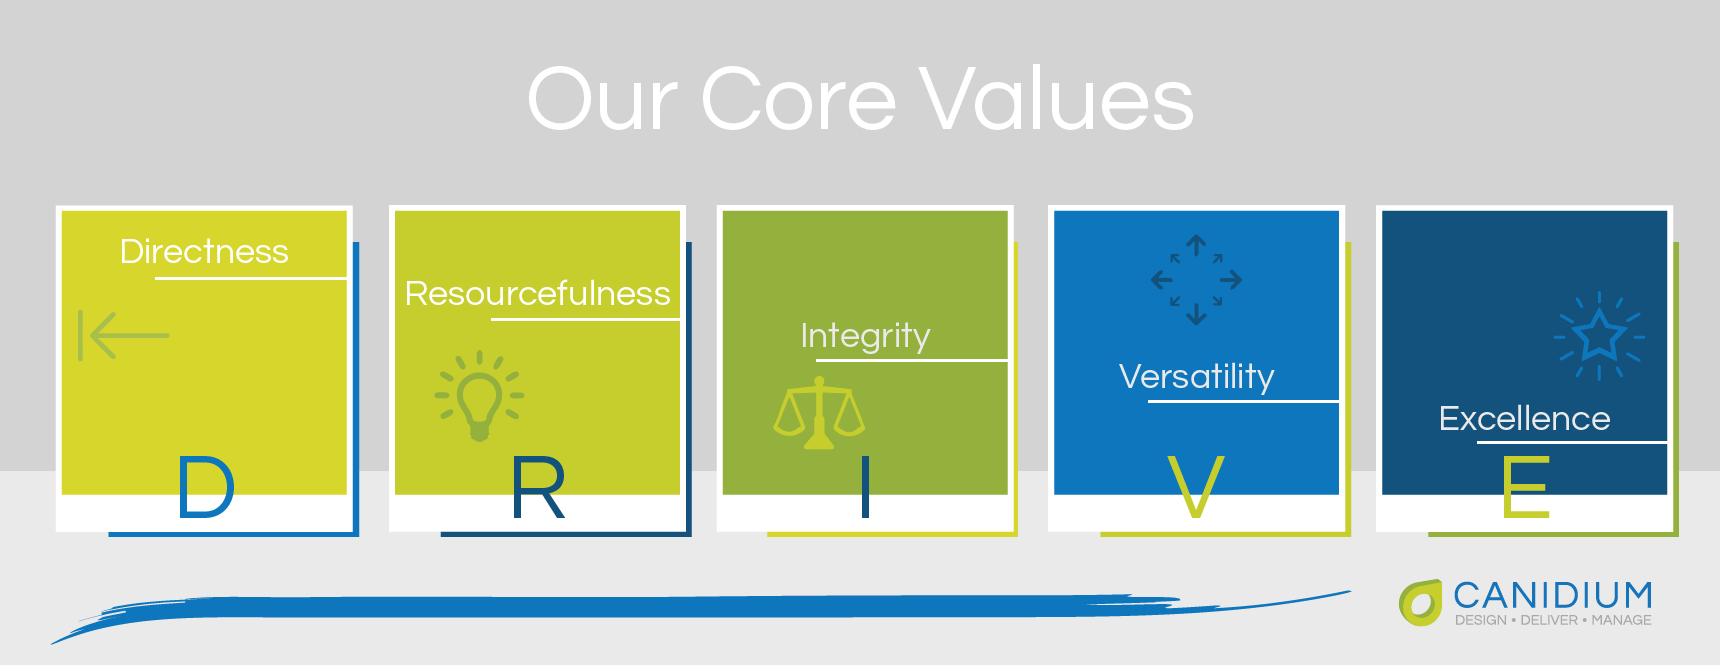 Our Core Values are Directness, Resourcefulness, Integrity, Versatility, Excellence